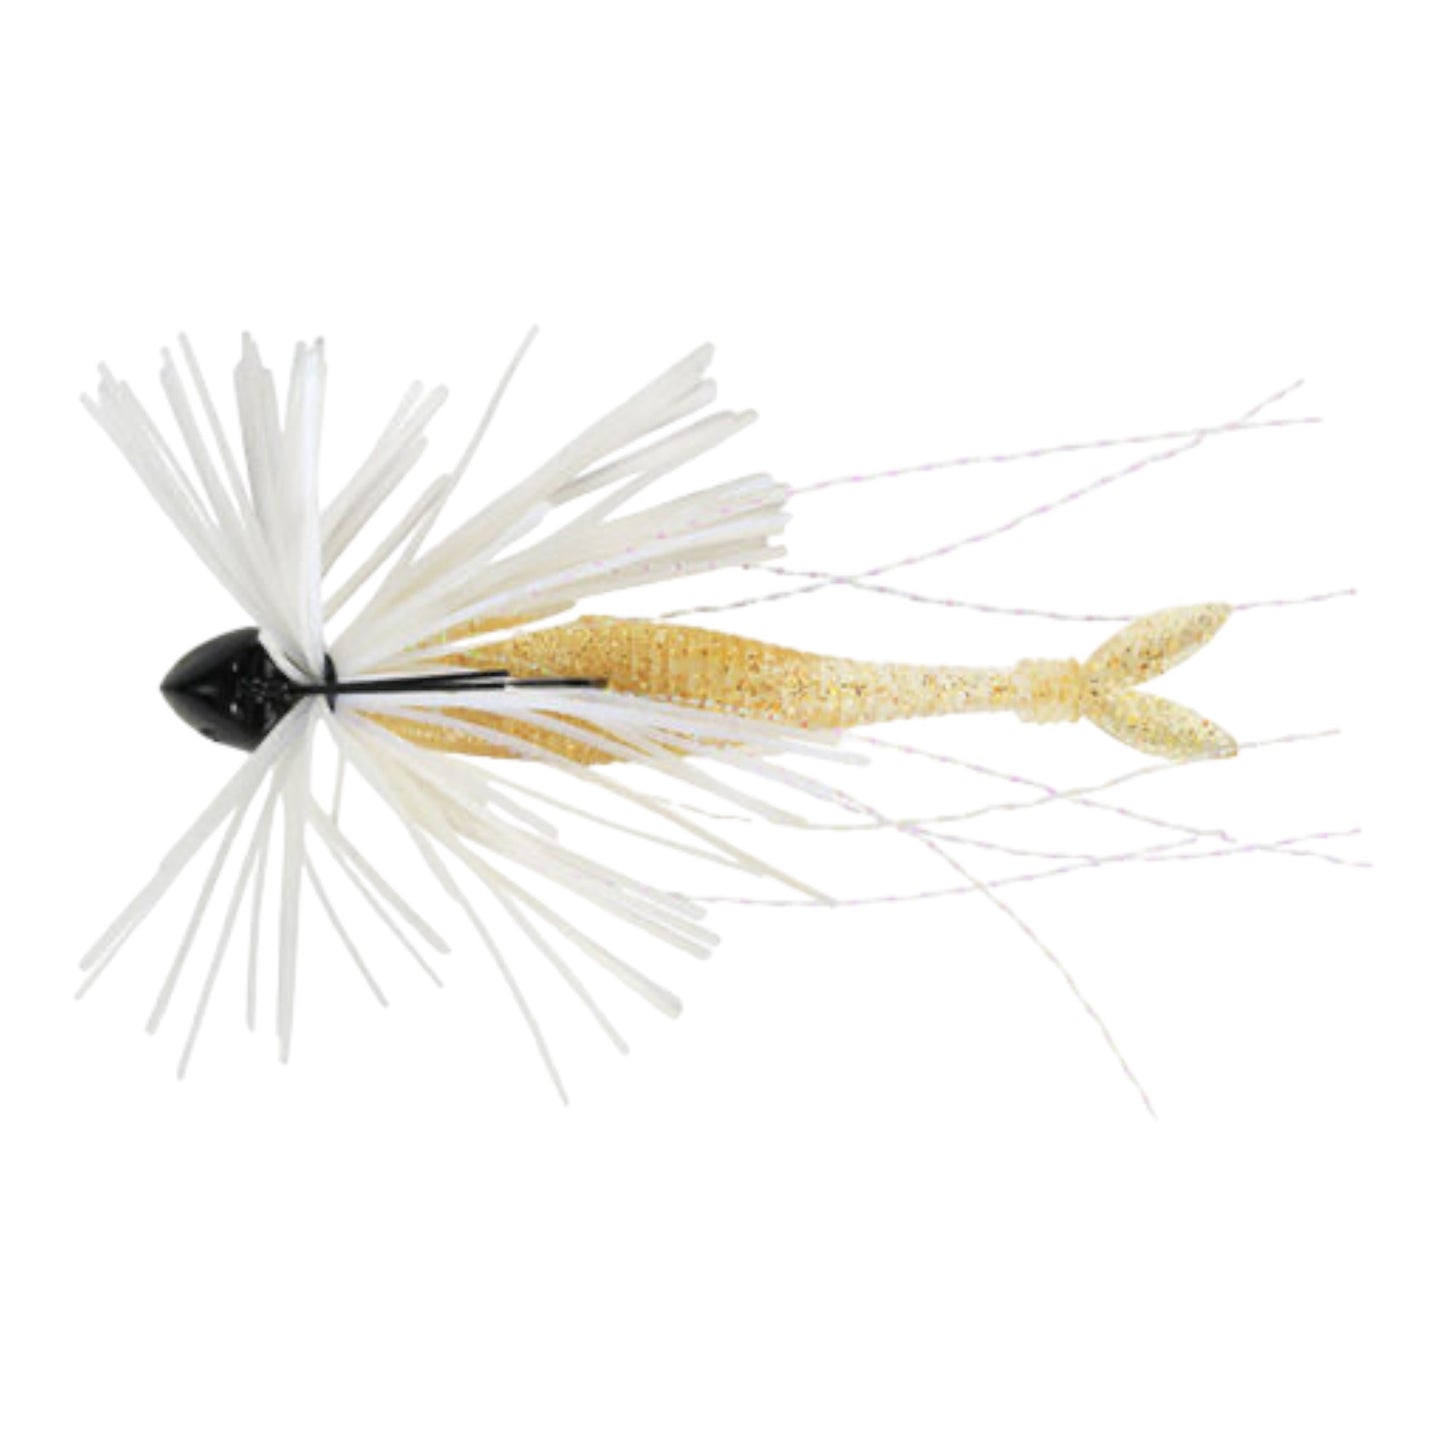 DUO Realis Small Rubber Jig